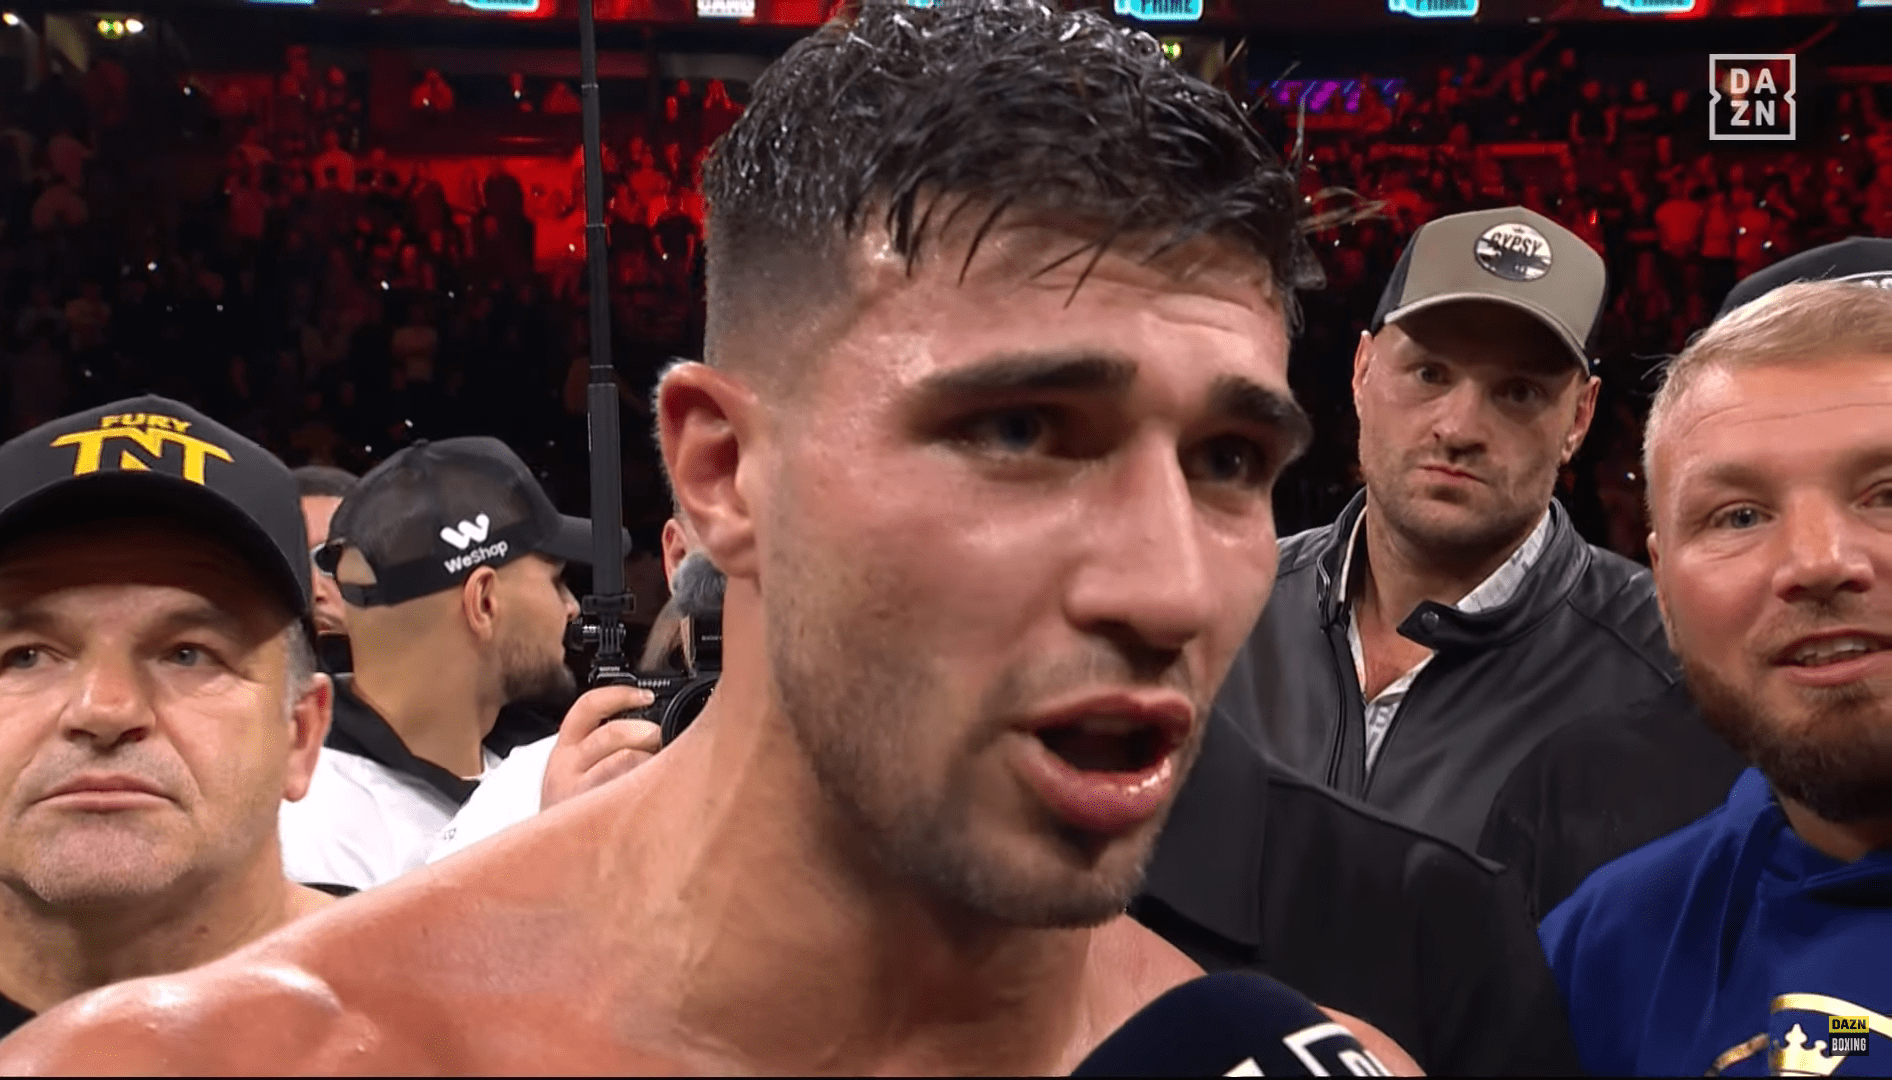 Tommy Fury rules out KSI rematch as he makes decision on future 'crossover' boxing fights